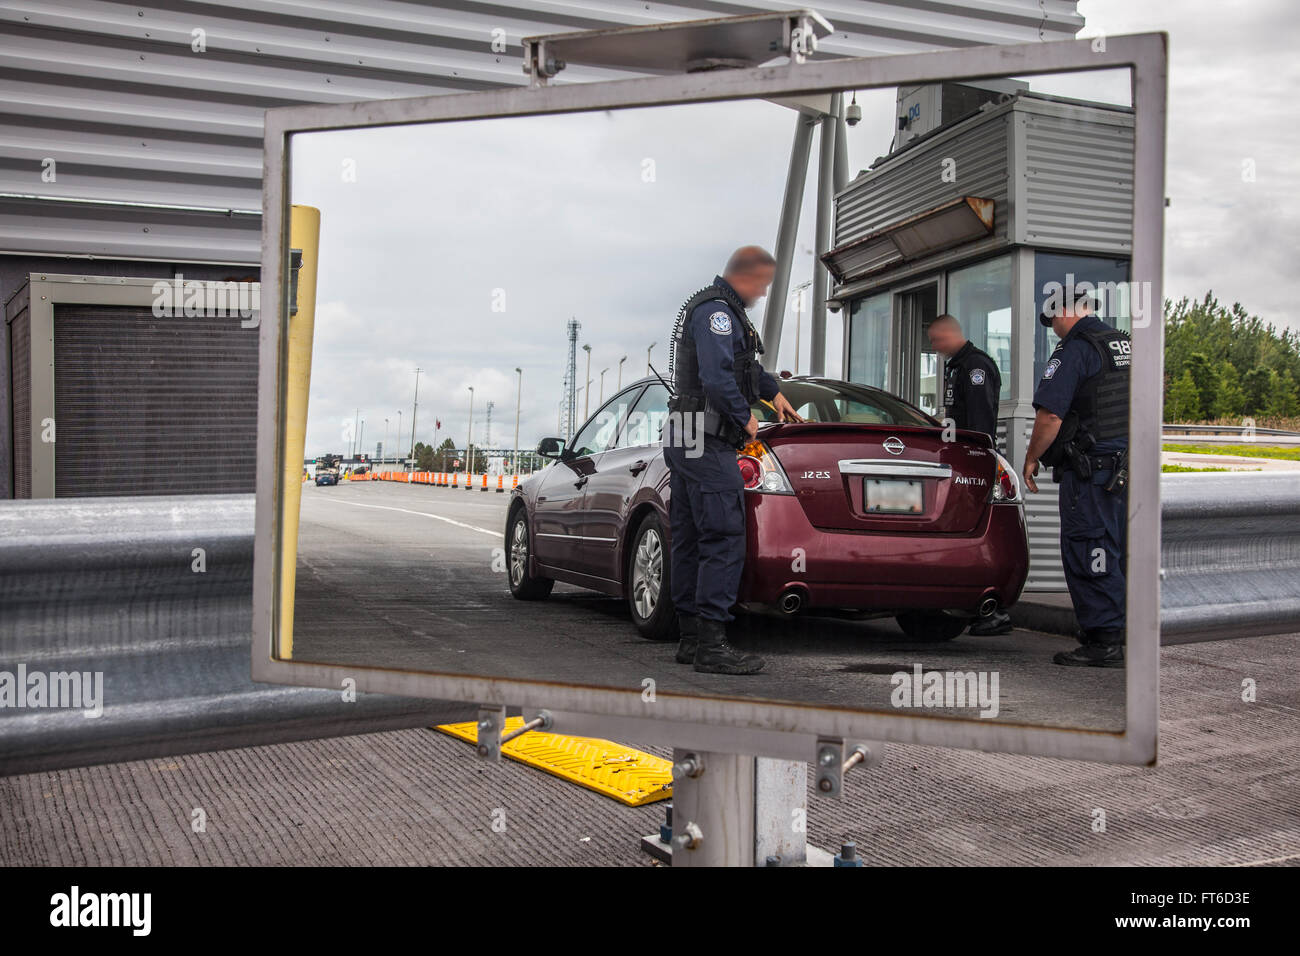 CBP officers search the truck of a vehicle leaving the United States on June 15 as part of the search effort of escaped convicts Richard Matt and David Sweat. Photo by: Krisoffer Grogan Stock Photo